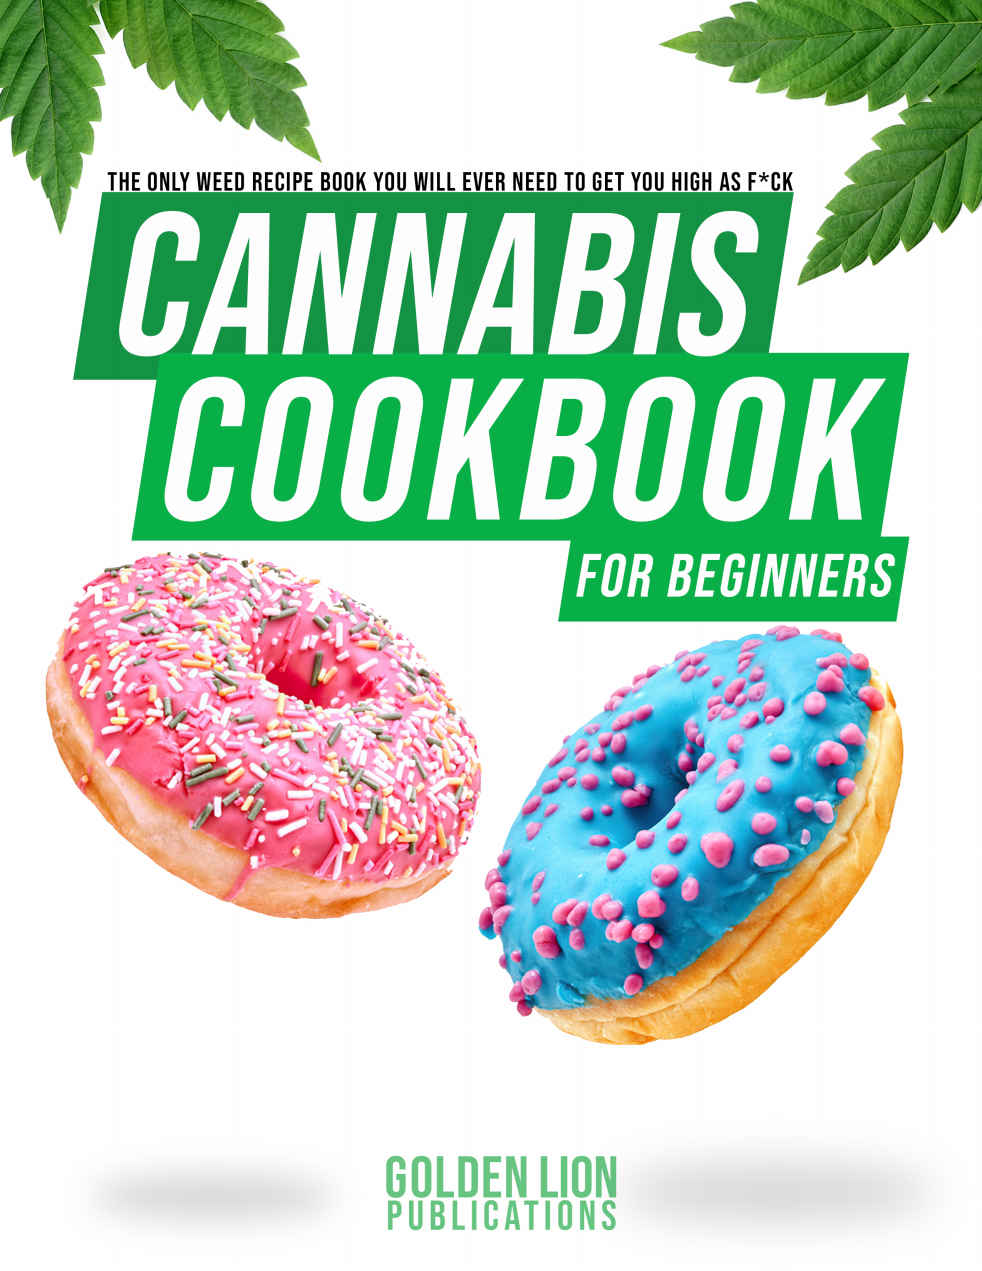 Cannabis Cookbook for Beginners: The Only Weed Recipe Book You Will Ever Need to Get You High as Fuck